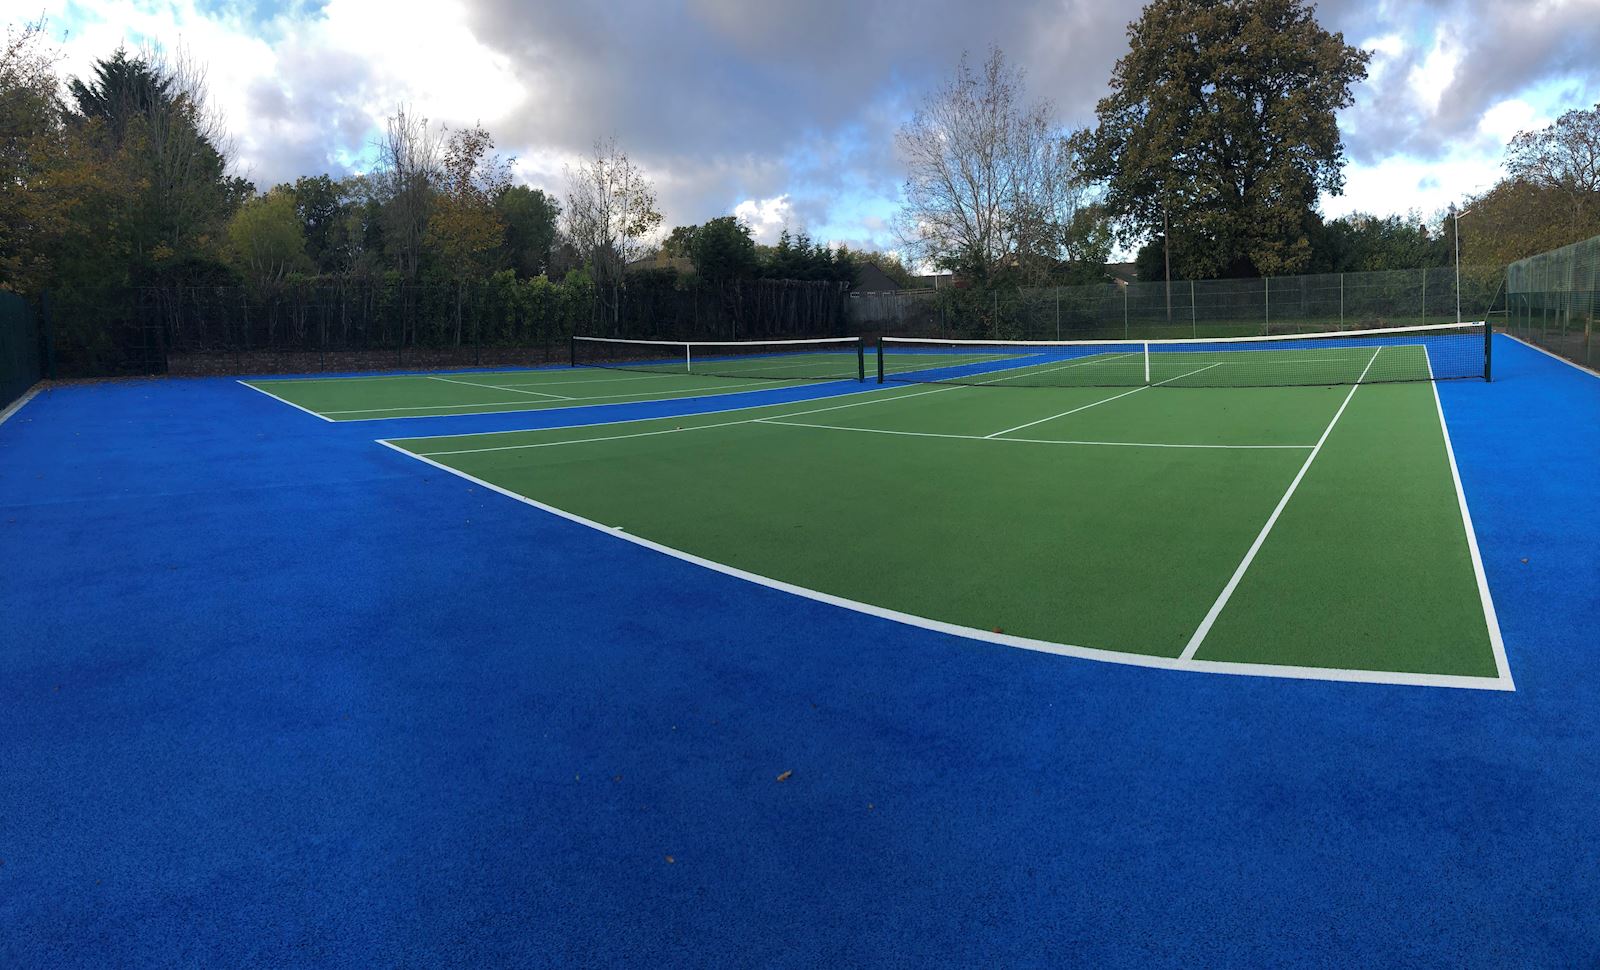 South Oxhey Tennis Courts